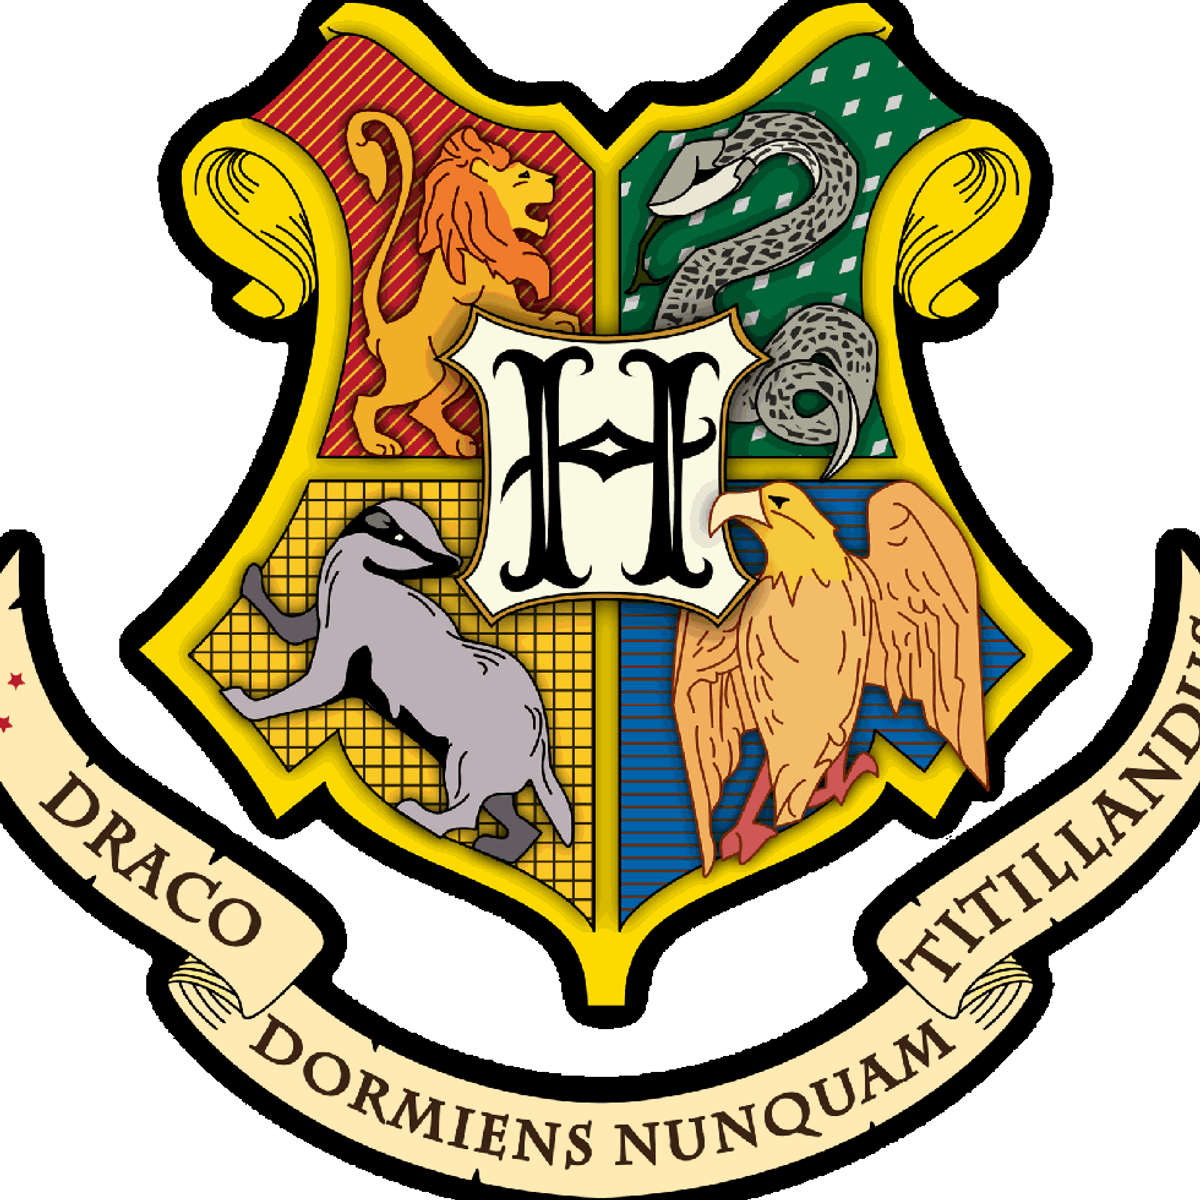 6 More Things that Bug Me About Harry Potter